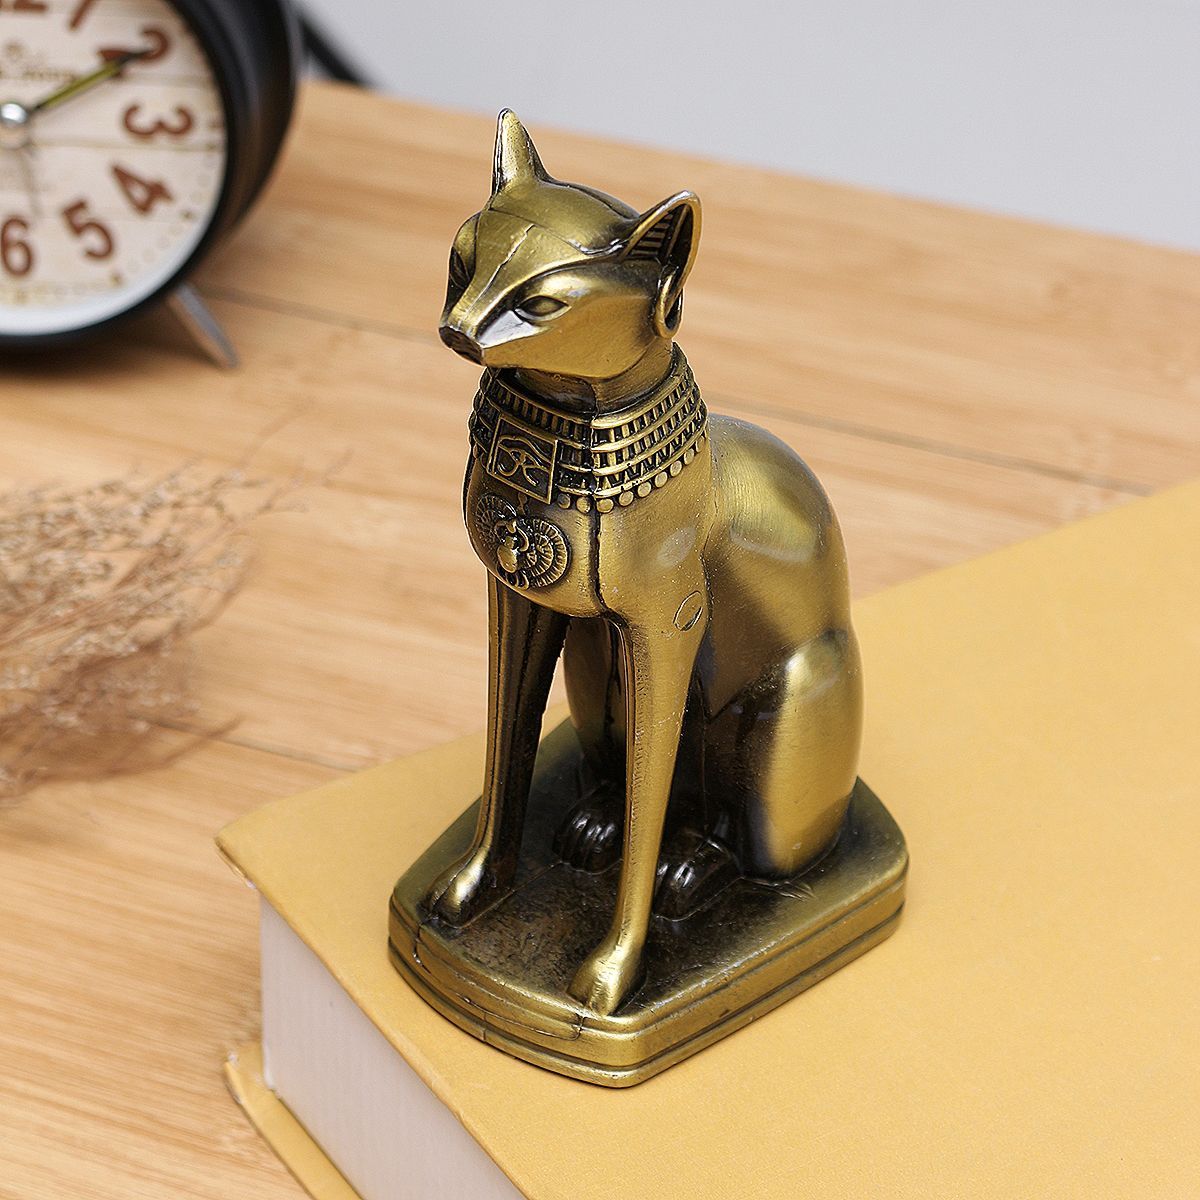 Retro-Egyptian-Cat-Ornament-Bronze-Alloy-Home-Decorations-Gift-Collection-Sculpture-1563184